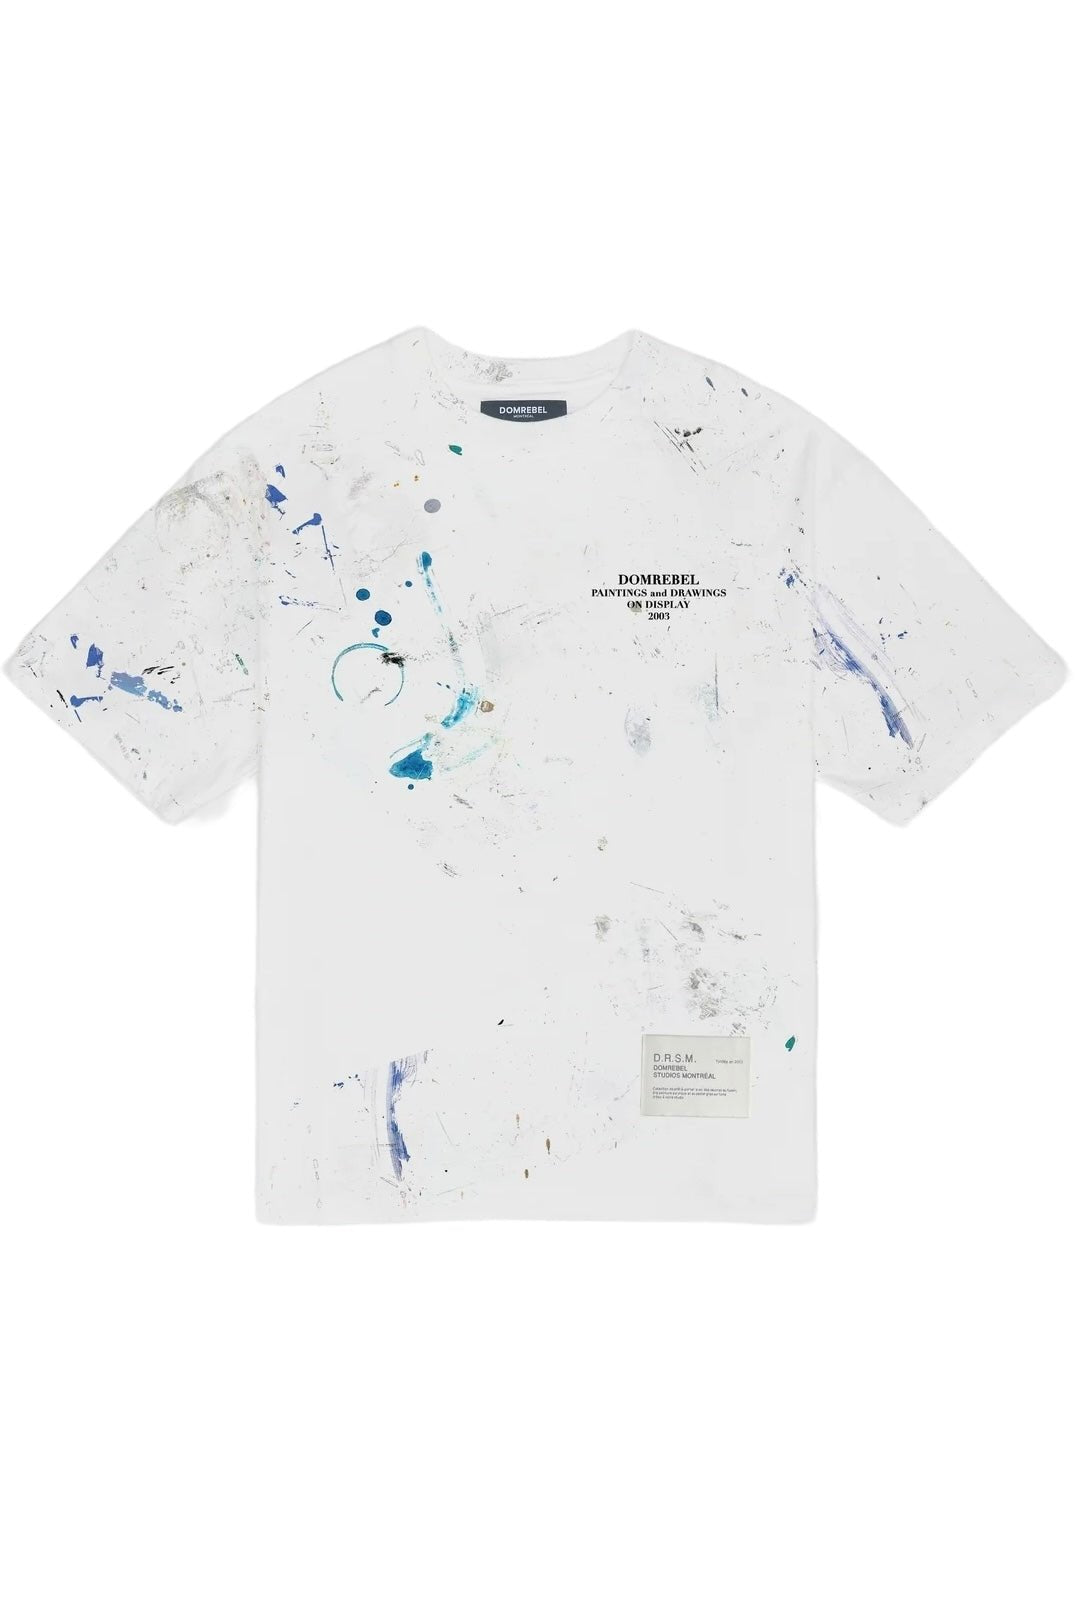 DOM REBEL's DOMREBEL RAG T-SHIRT IVORY features scattered multicolored paint splatters and text on the front, crafted from 200gsm ringspun jersey cotton for a comfortable feel.